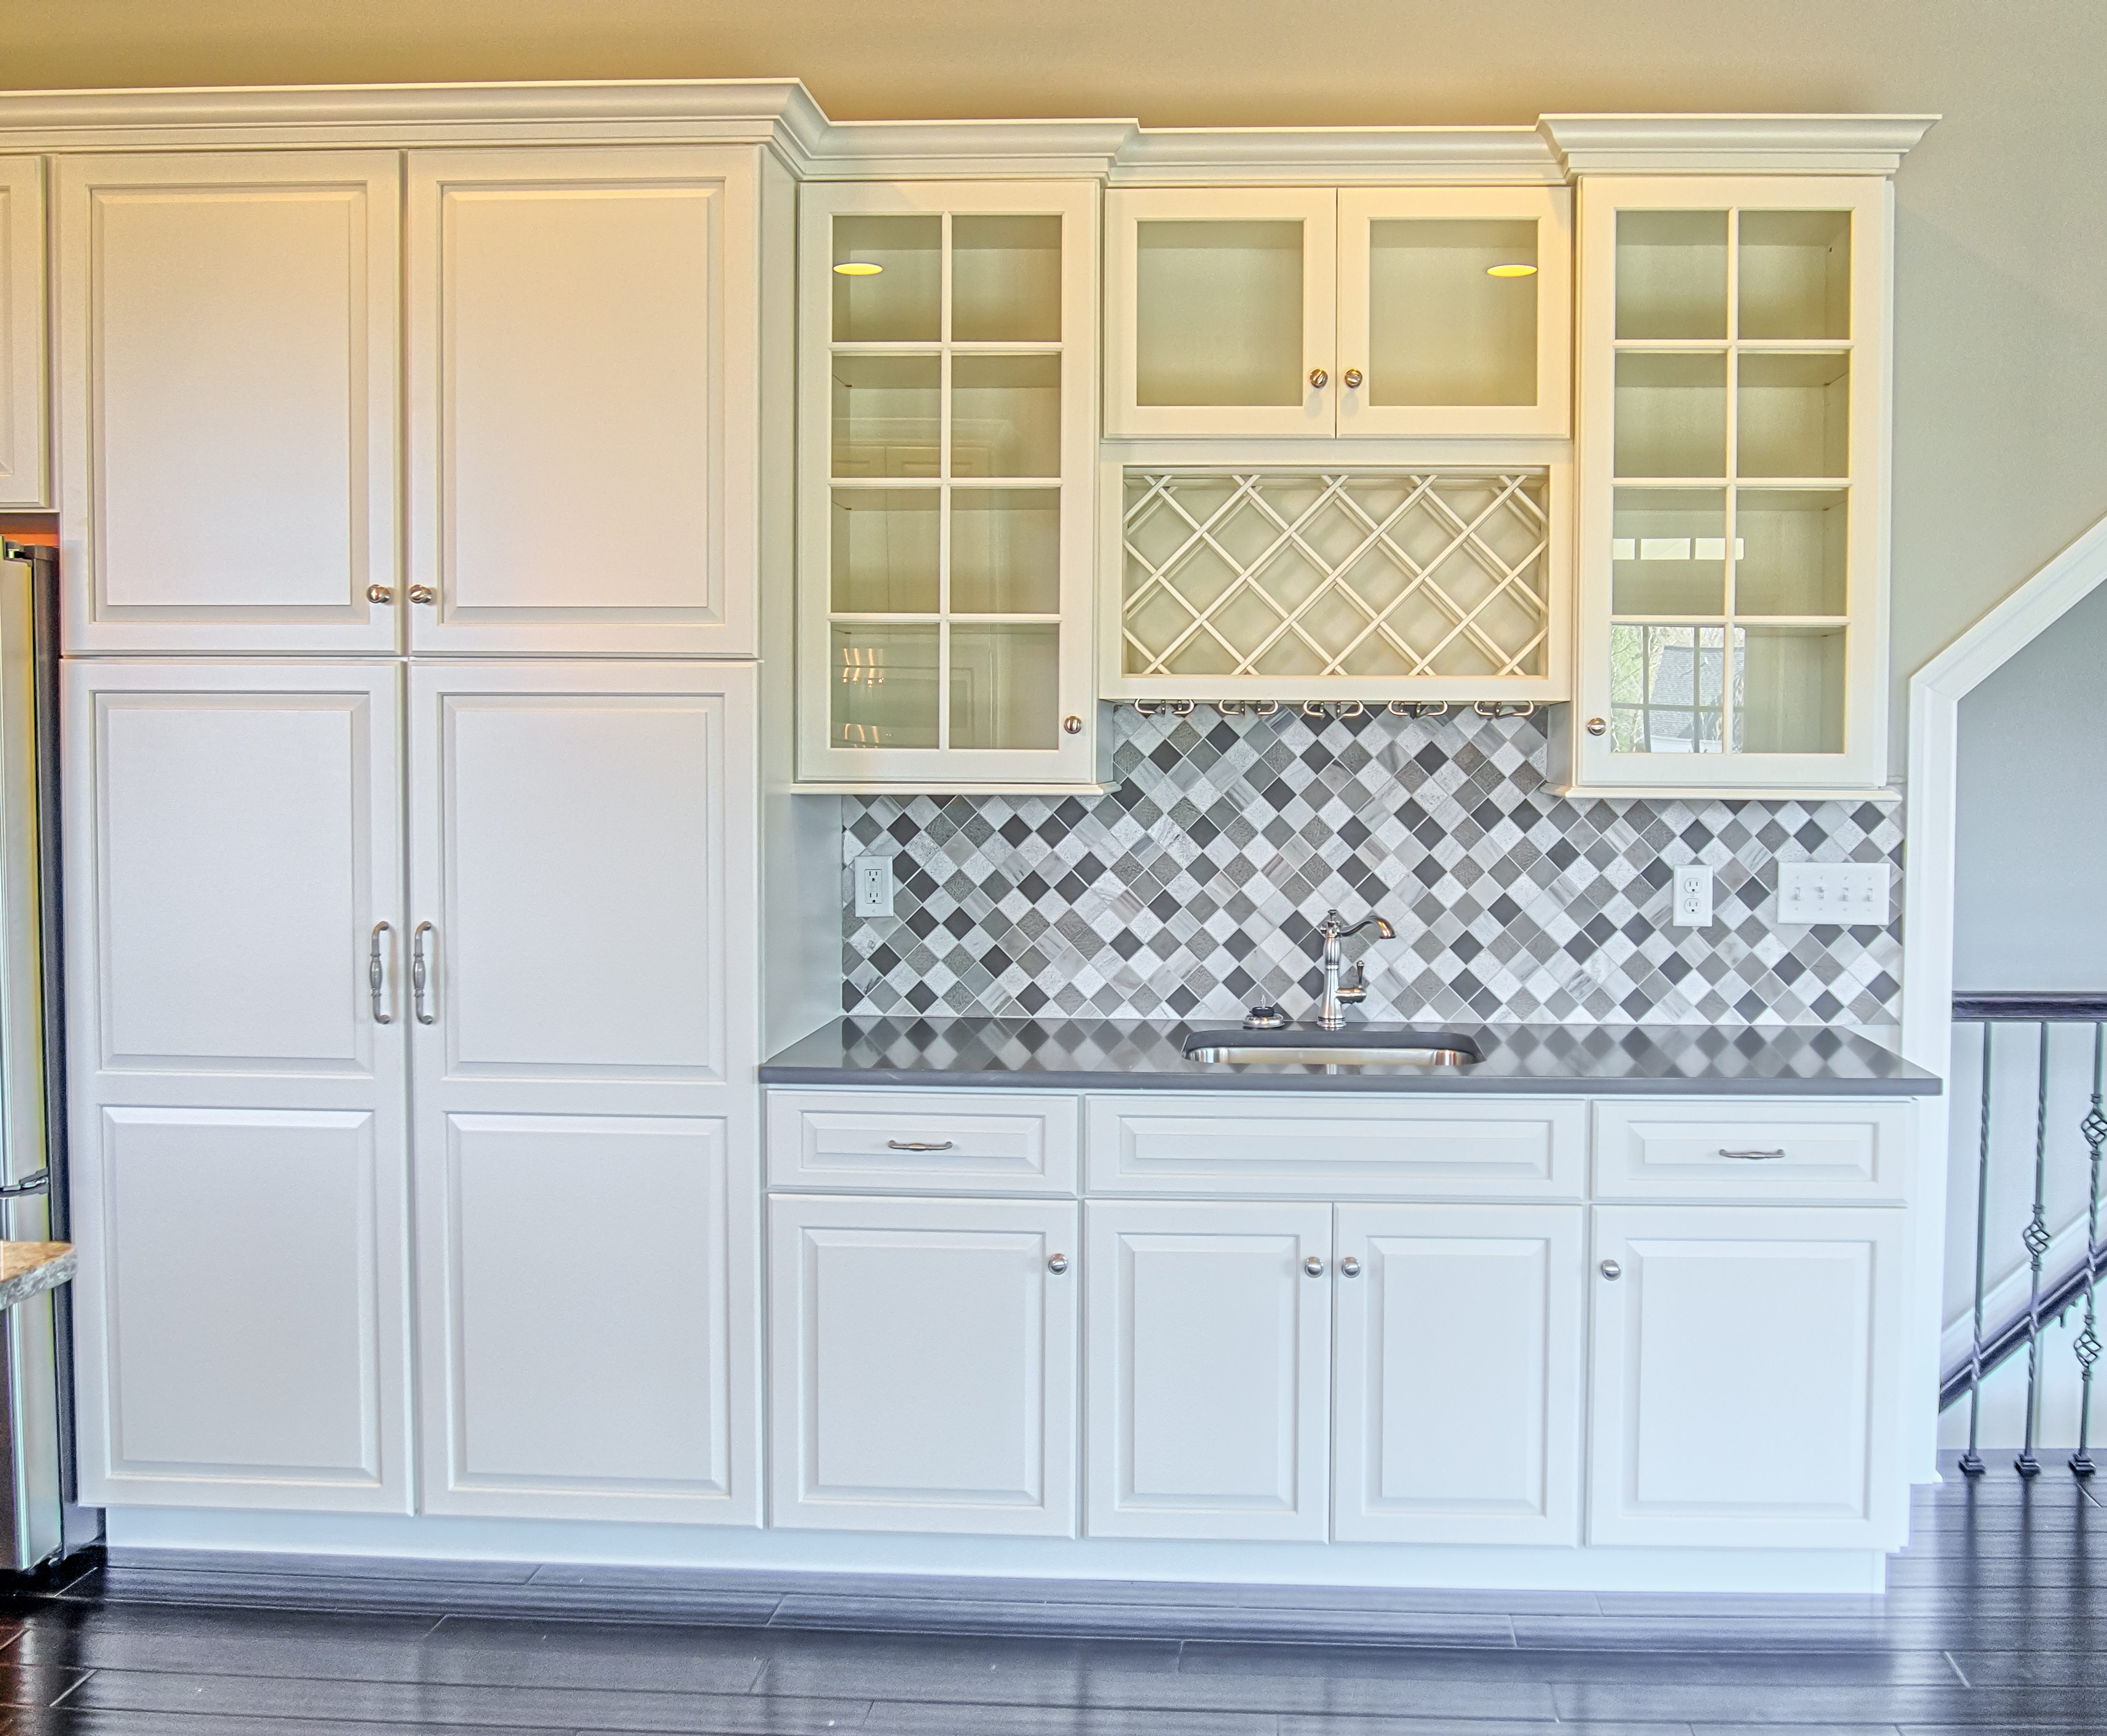 floor-to-ceiling cabinetry